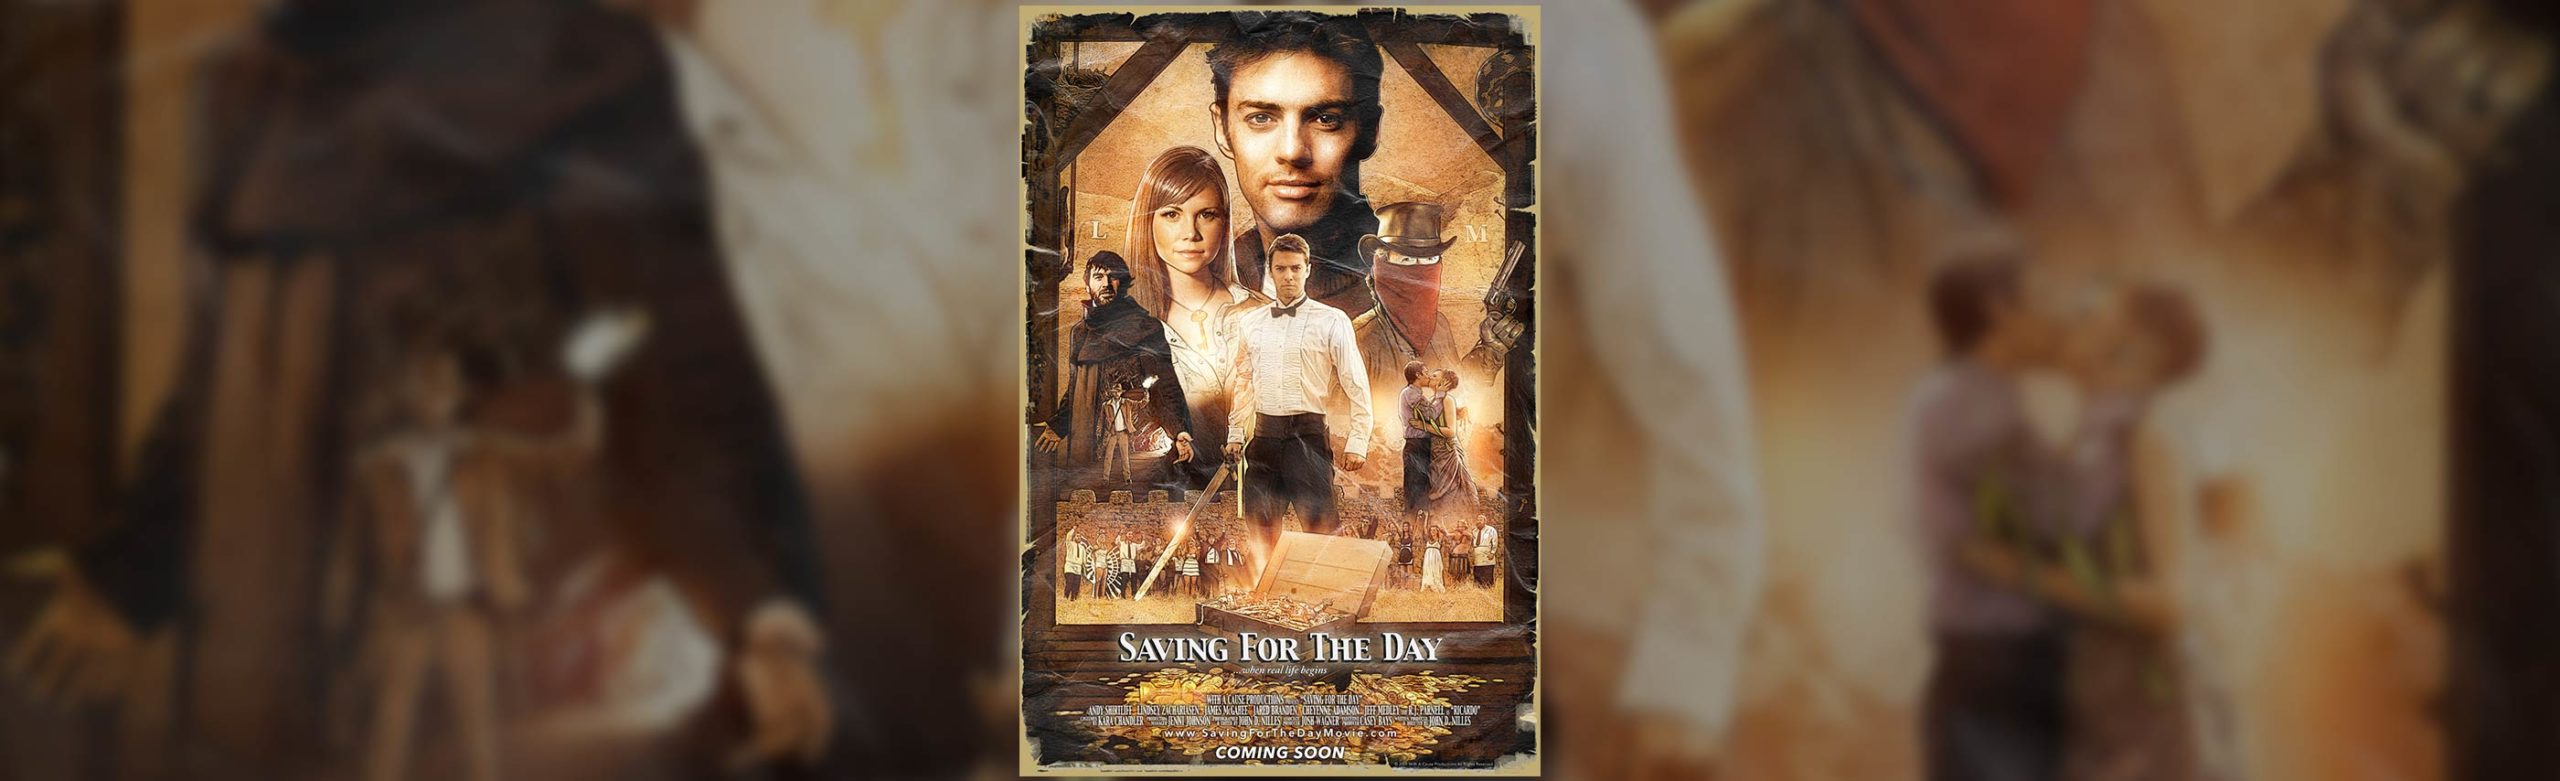 ‘Saving For The Day’ World Premiere